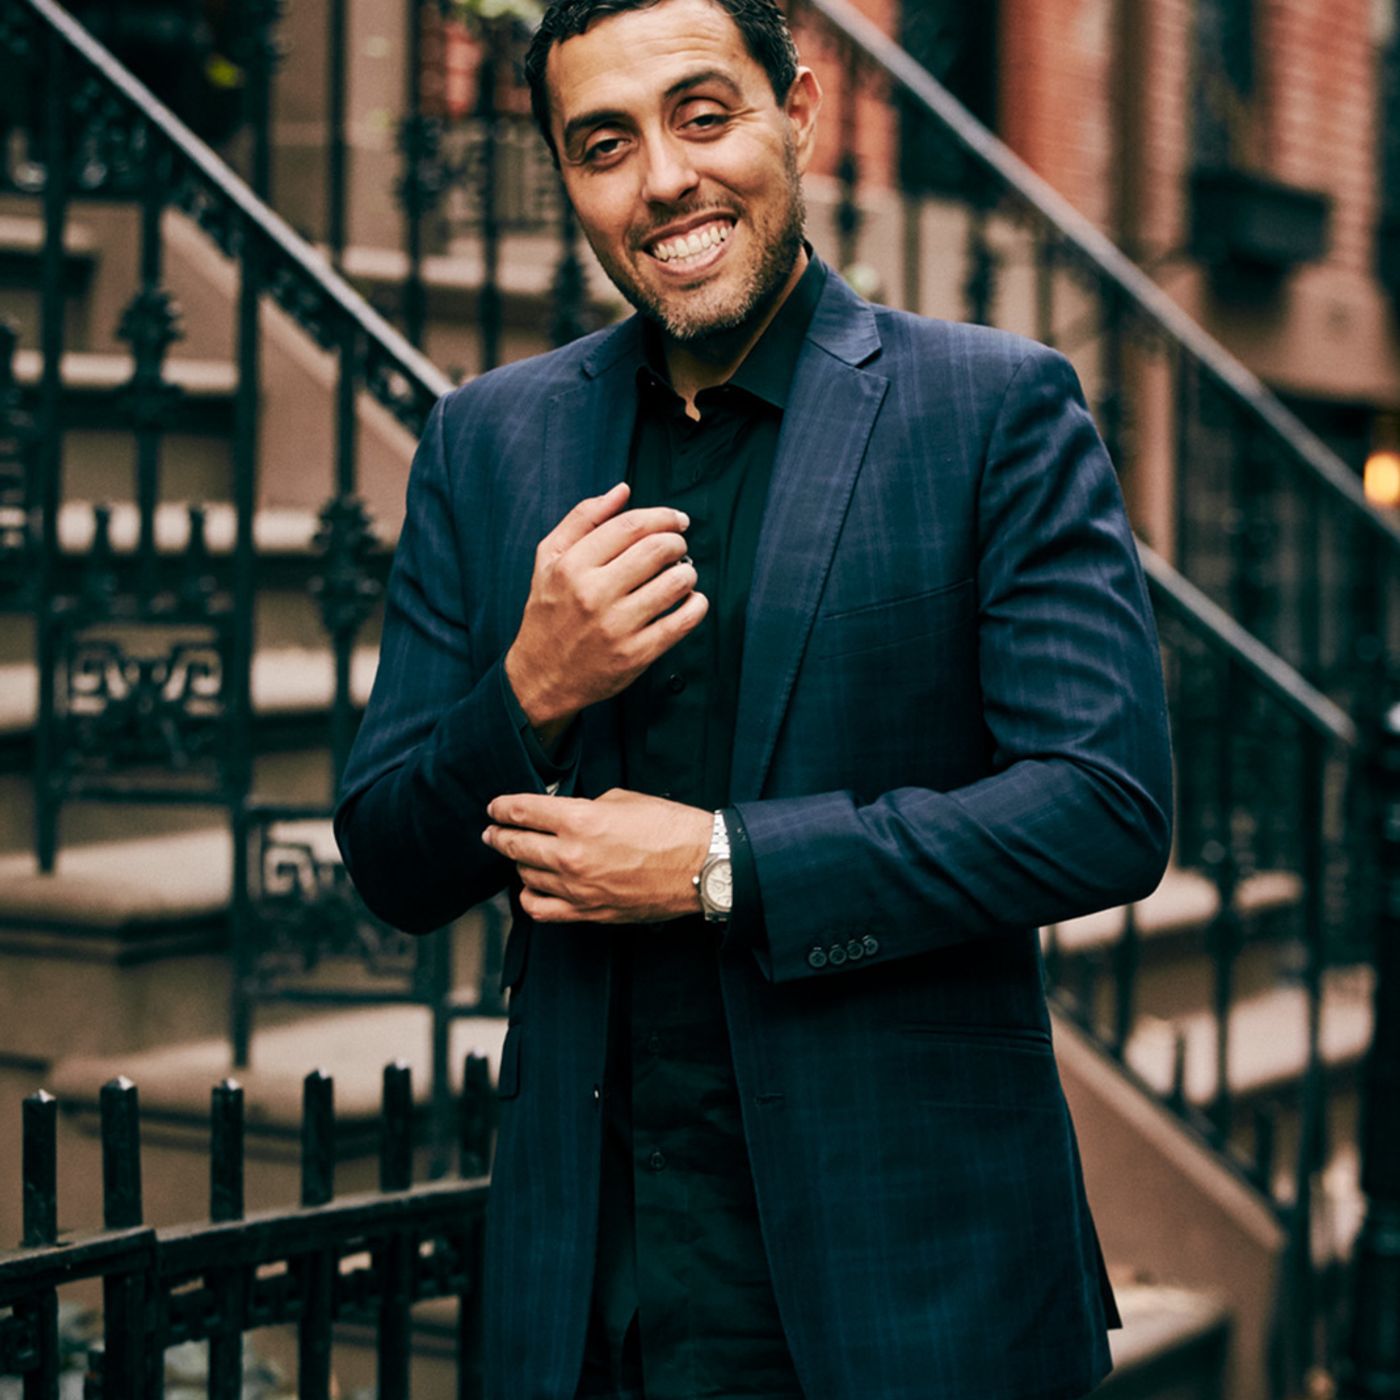 8: Jairek Robbins: Are you performing in the important areas of life?